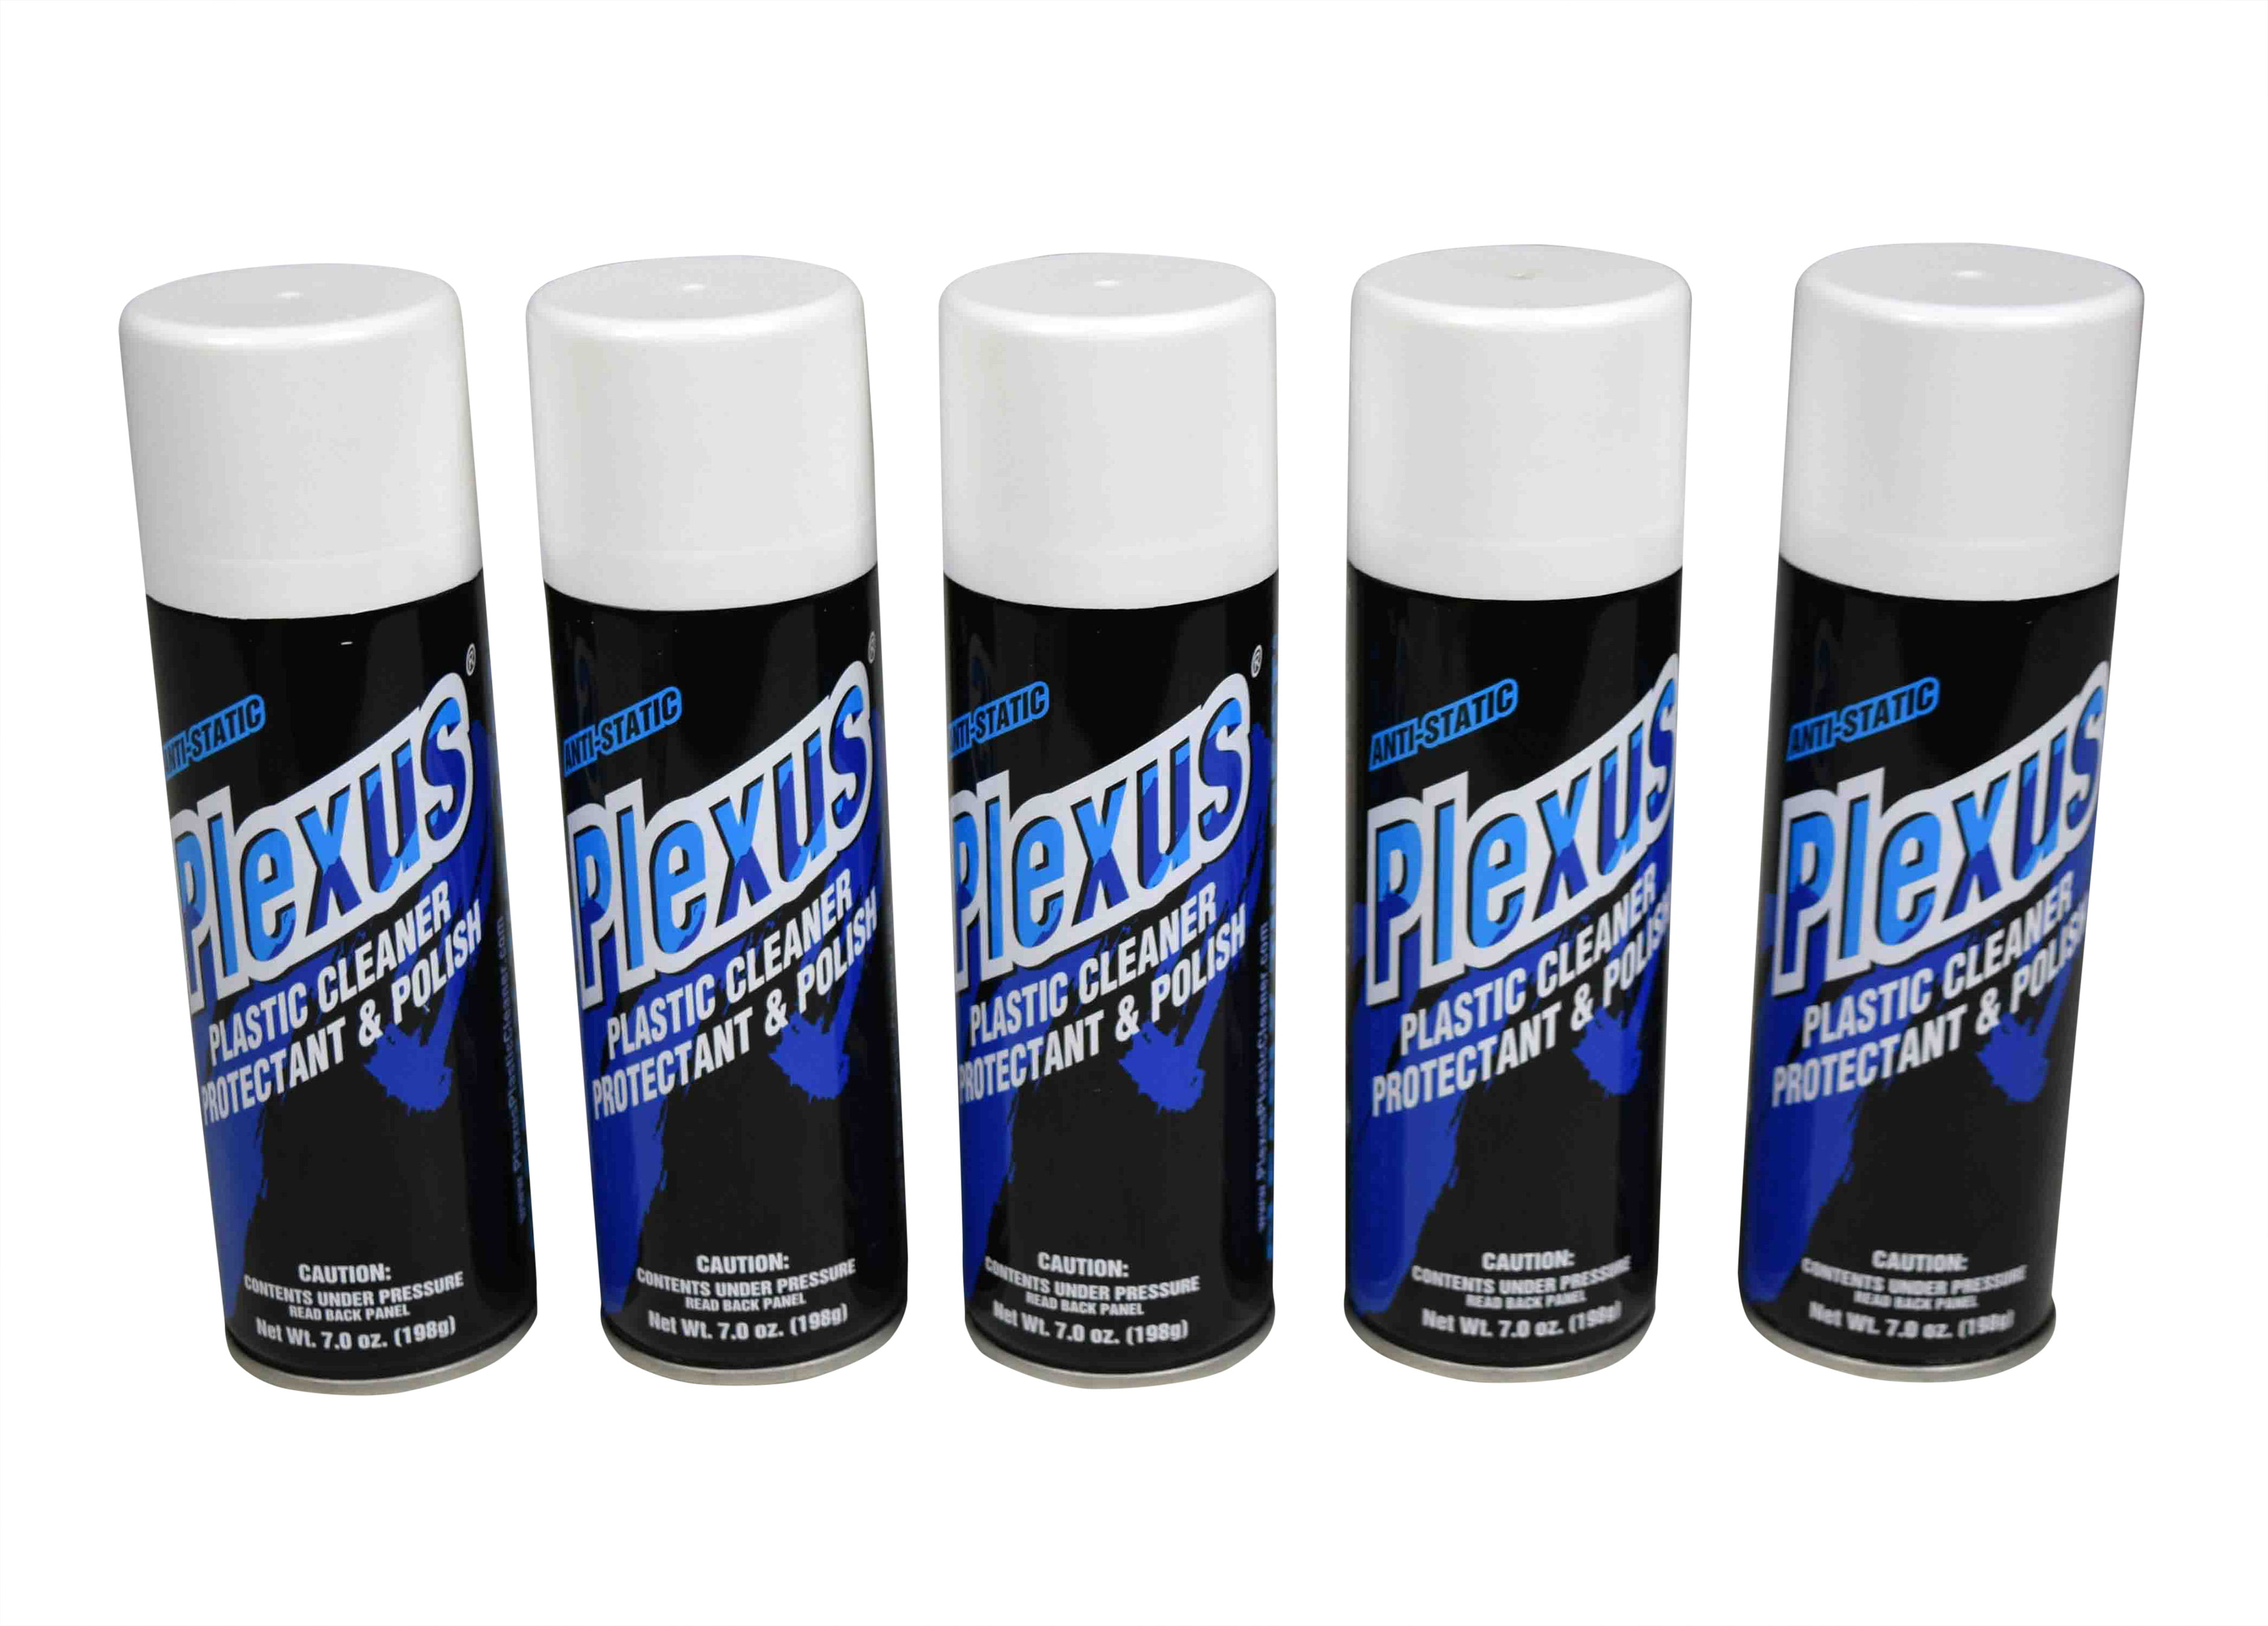 Shiny and Spotless: Plexus Plastic Cleaner and Polish